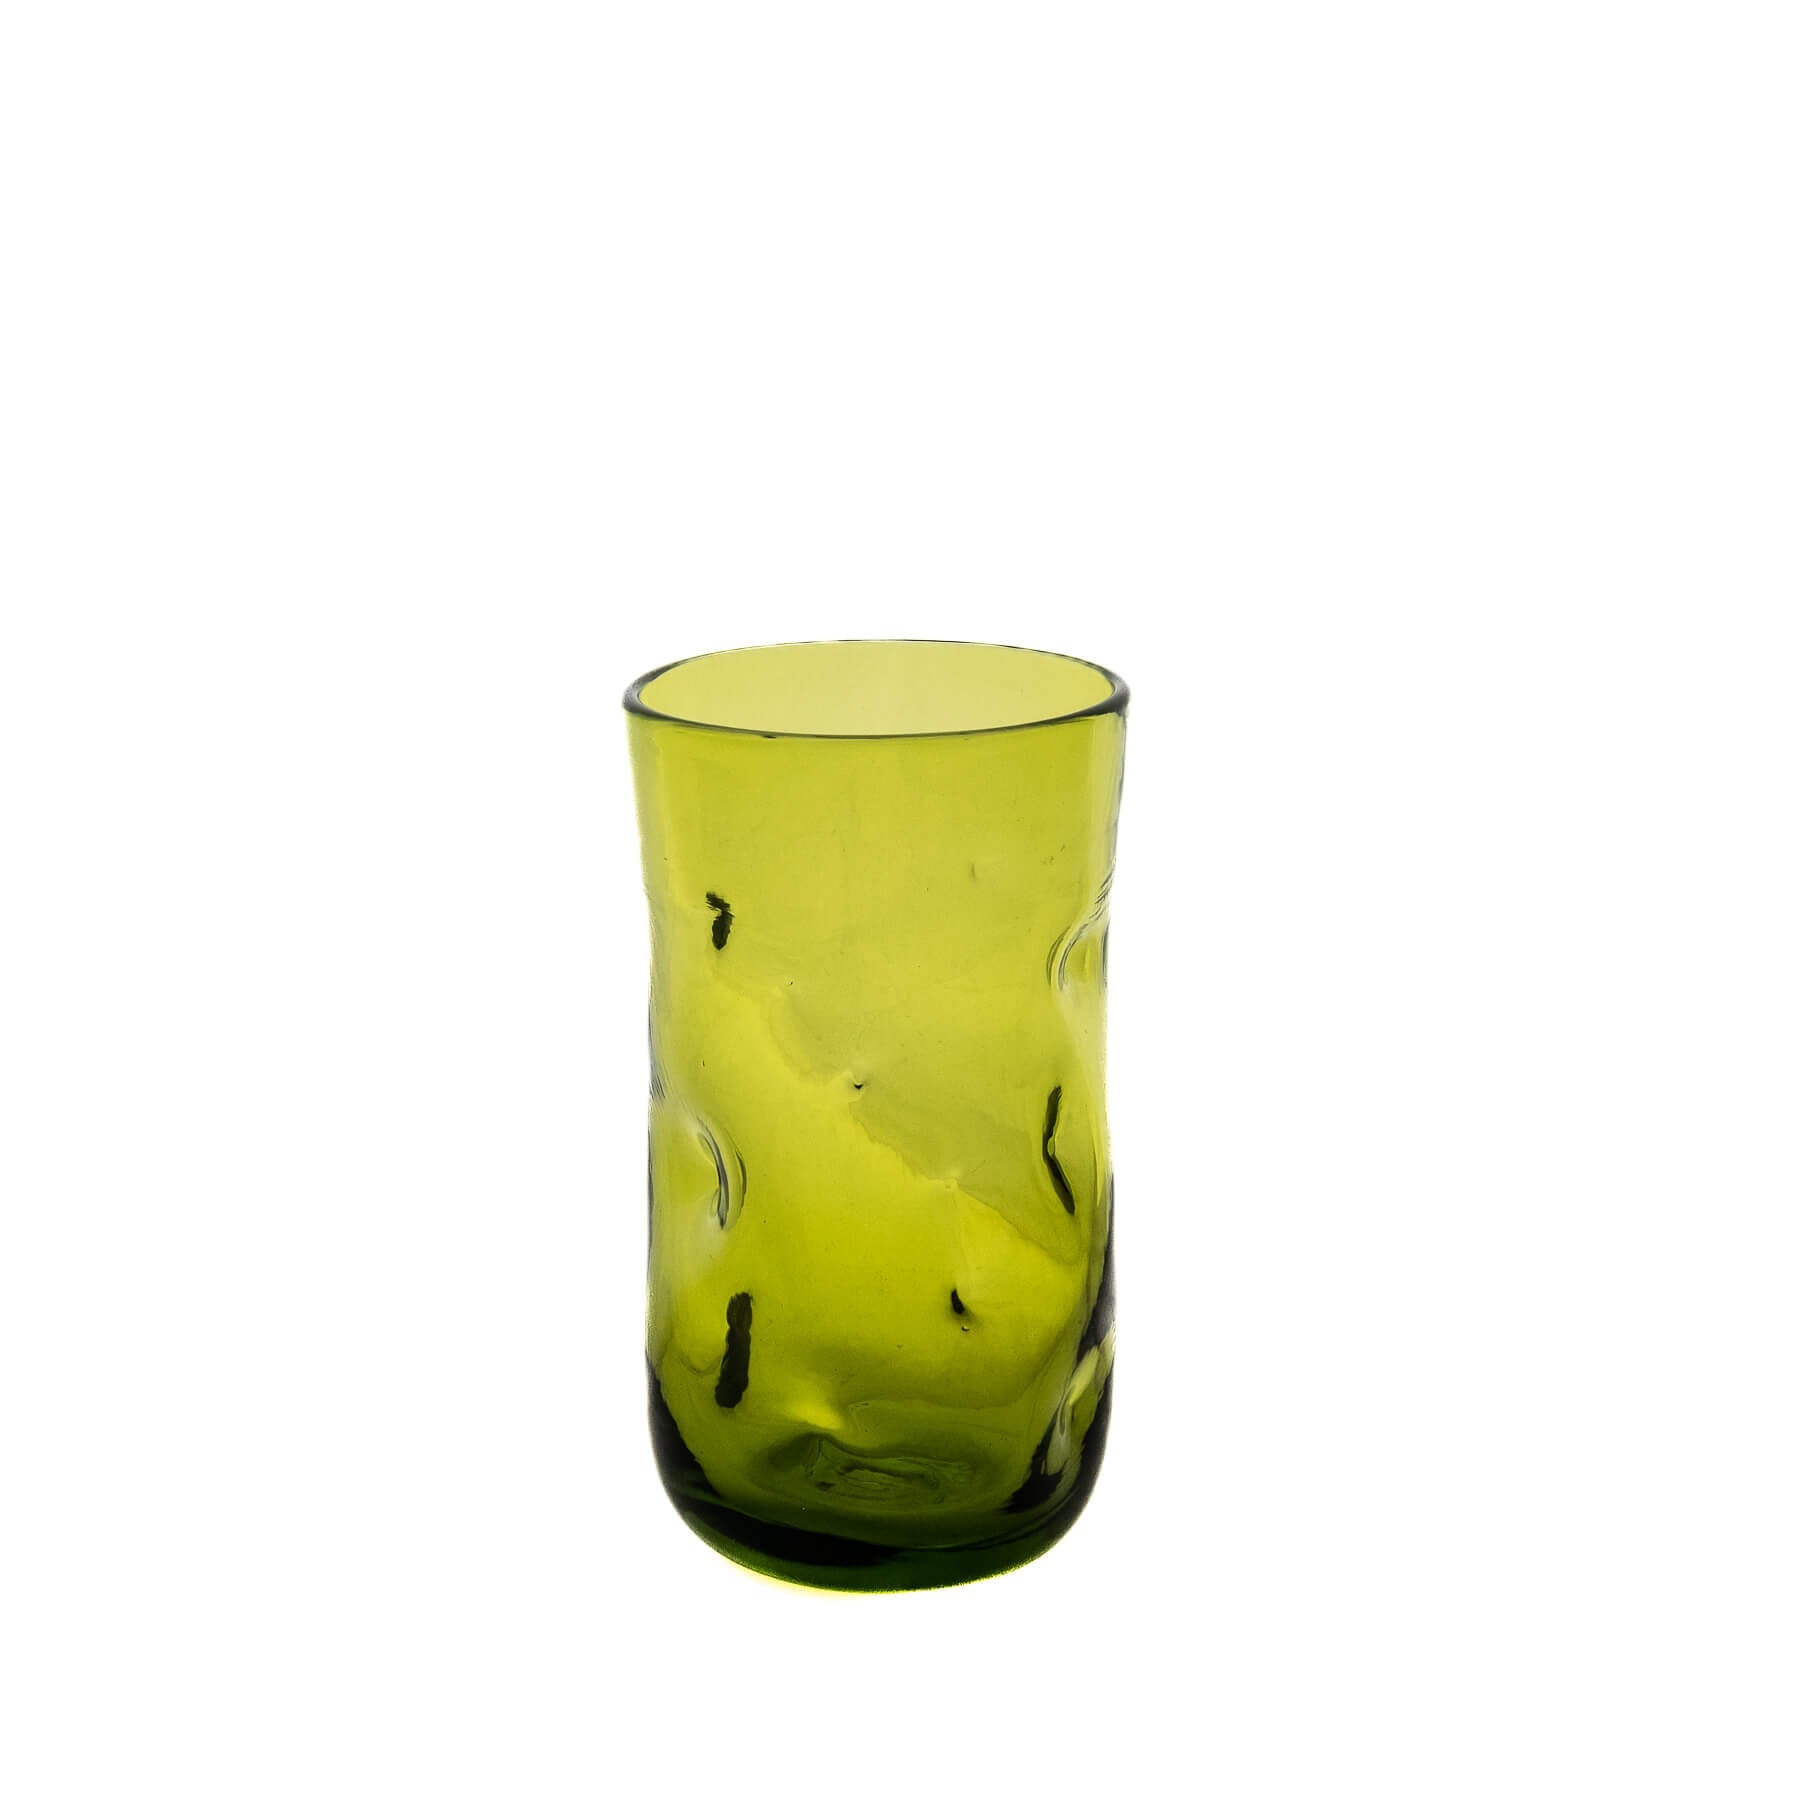 Product photo for Blenko 418L Large Dimple Glass - Olive